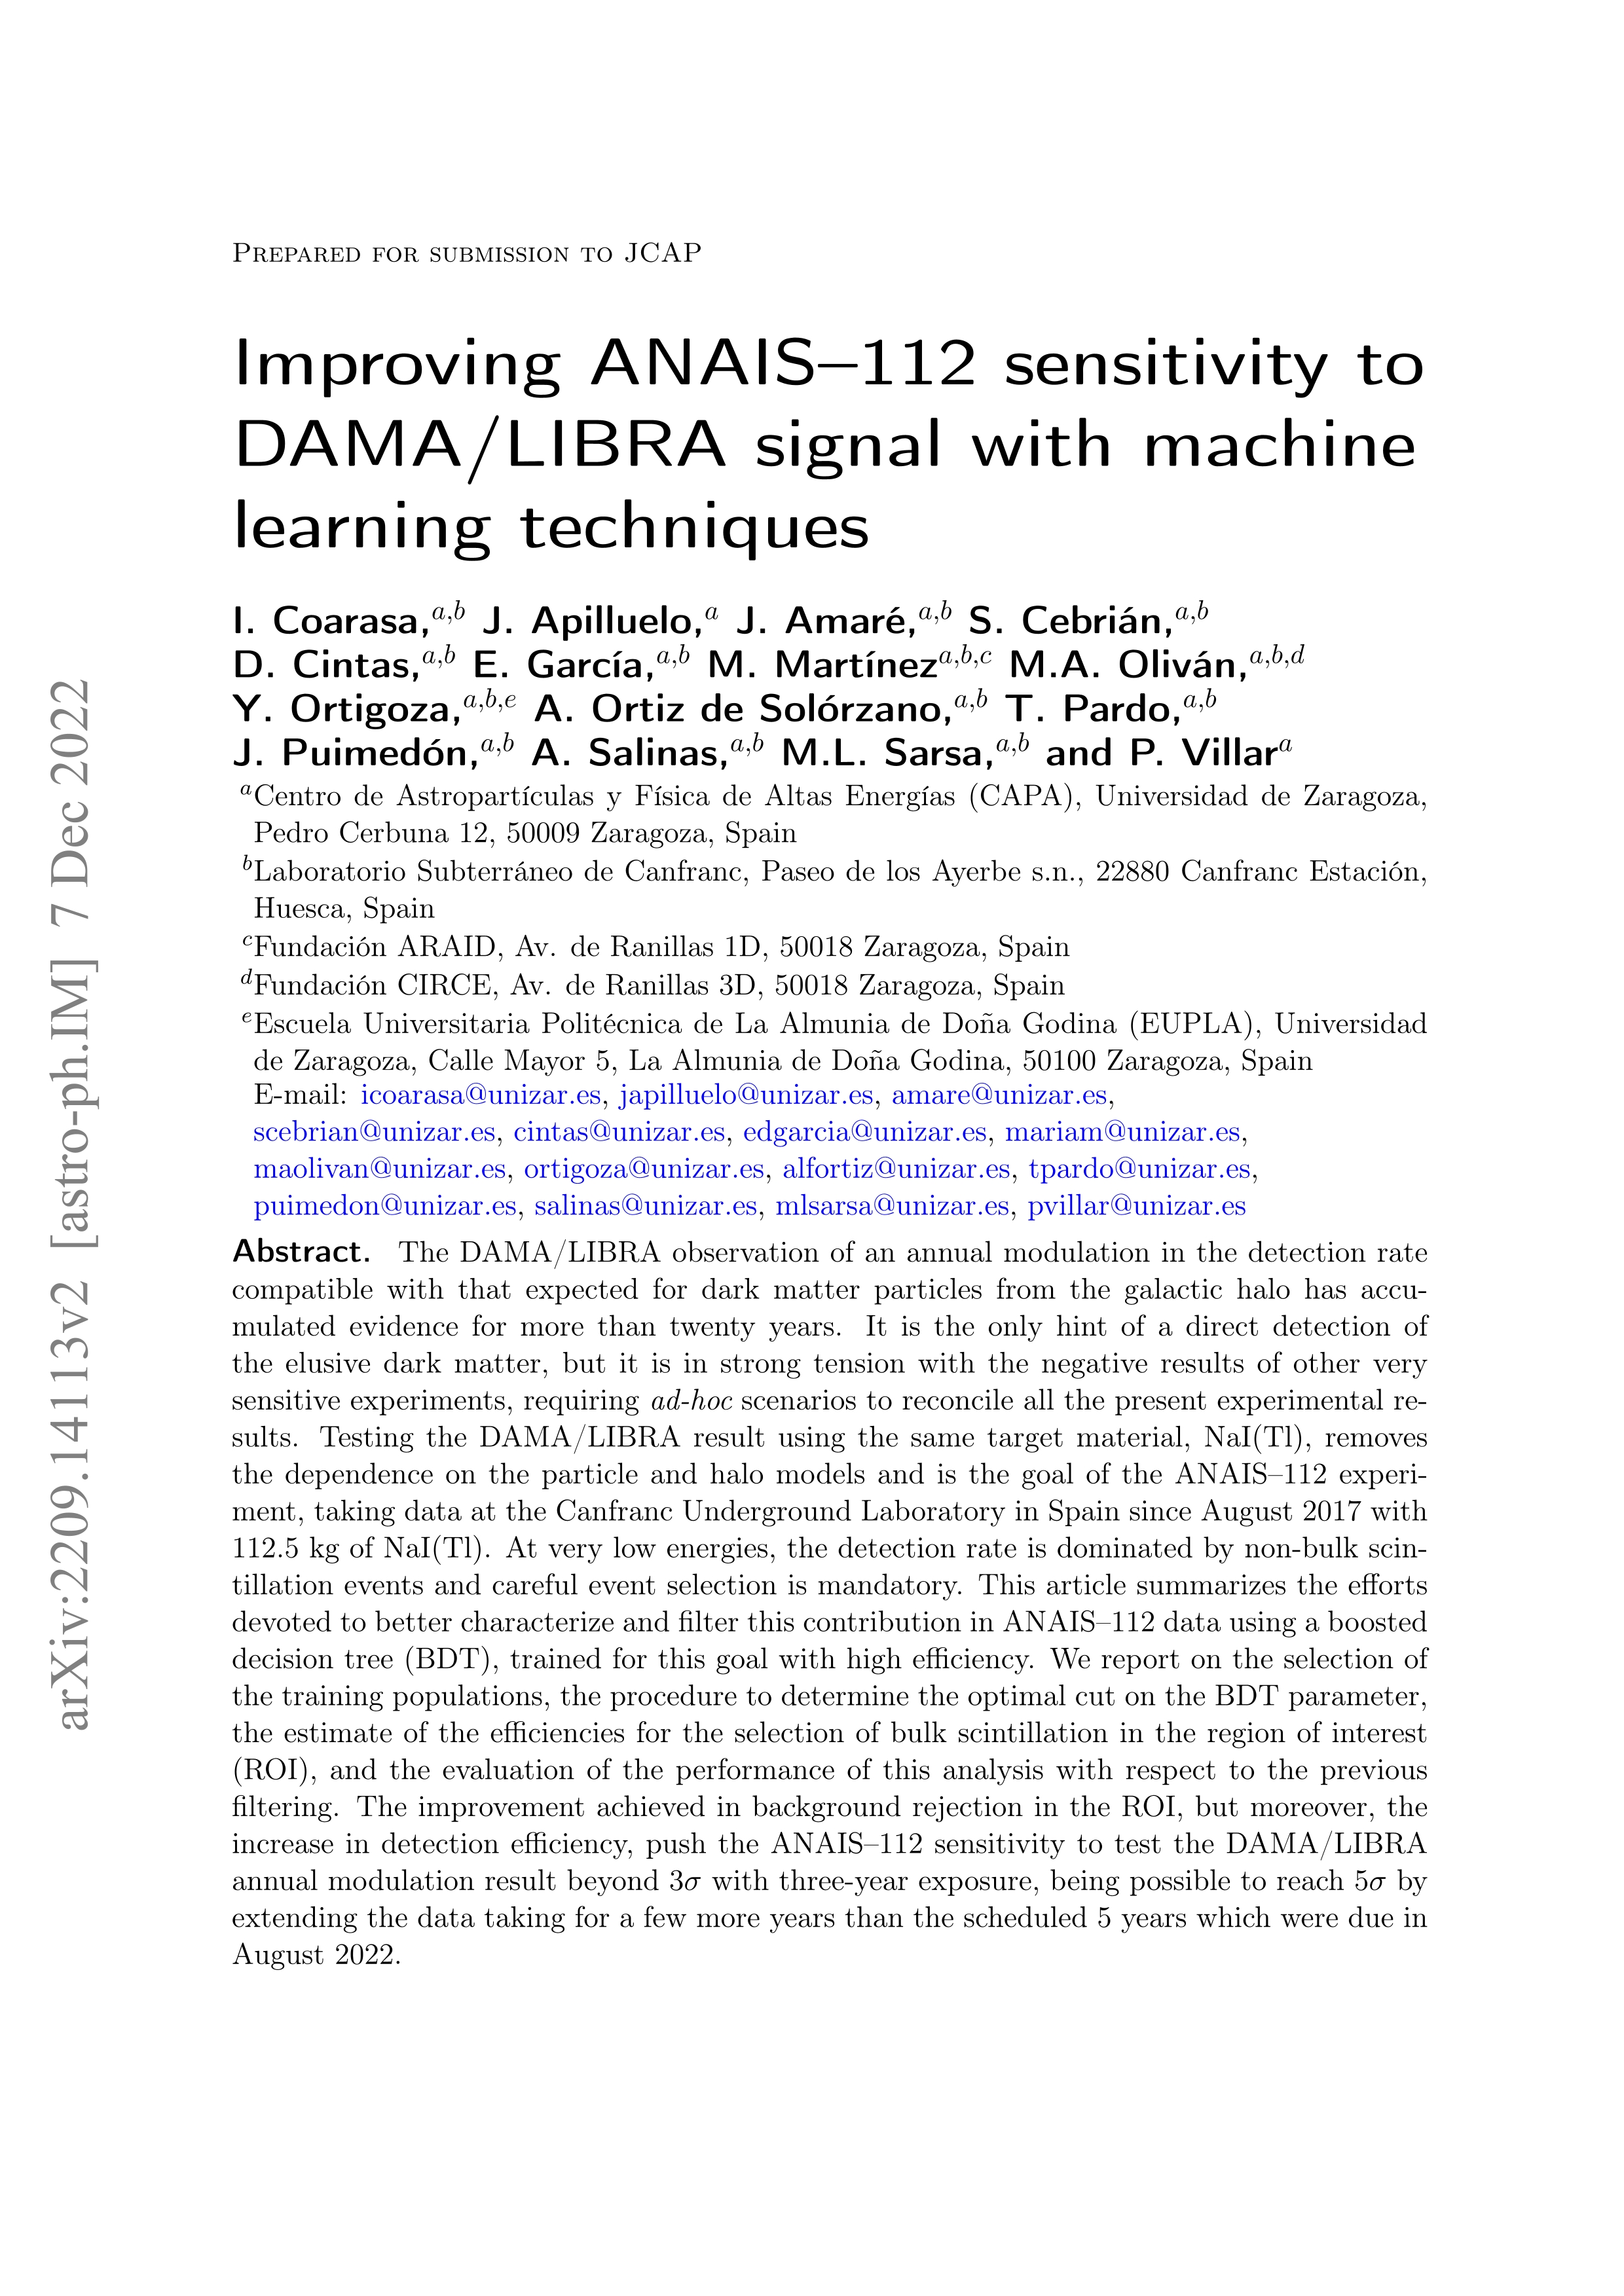 Improving ANAIS-112 sensitivity to DAMA/LIBRA signal with machine learning techniques